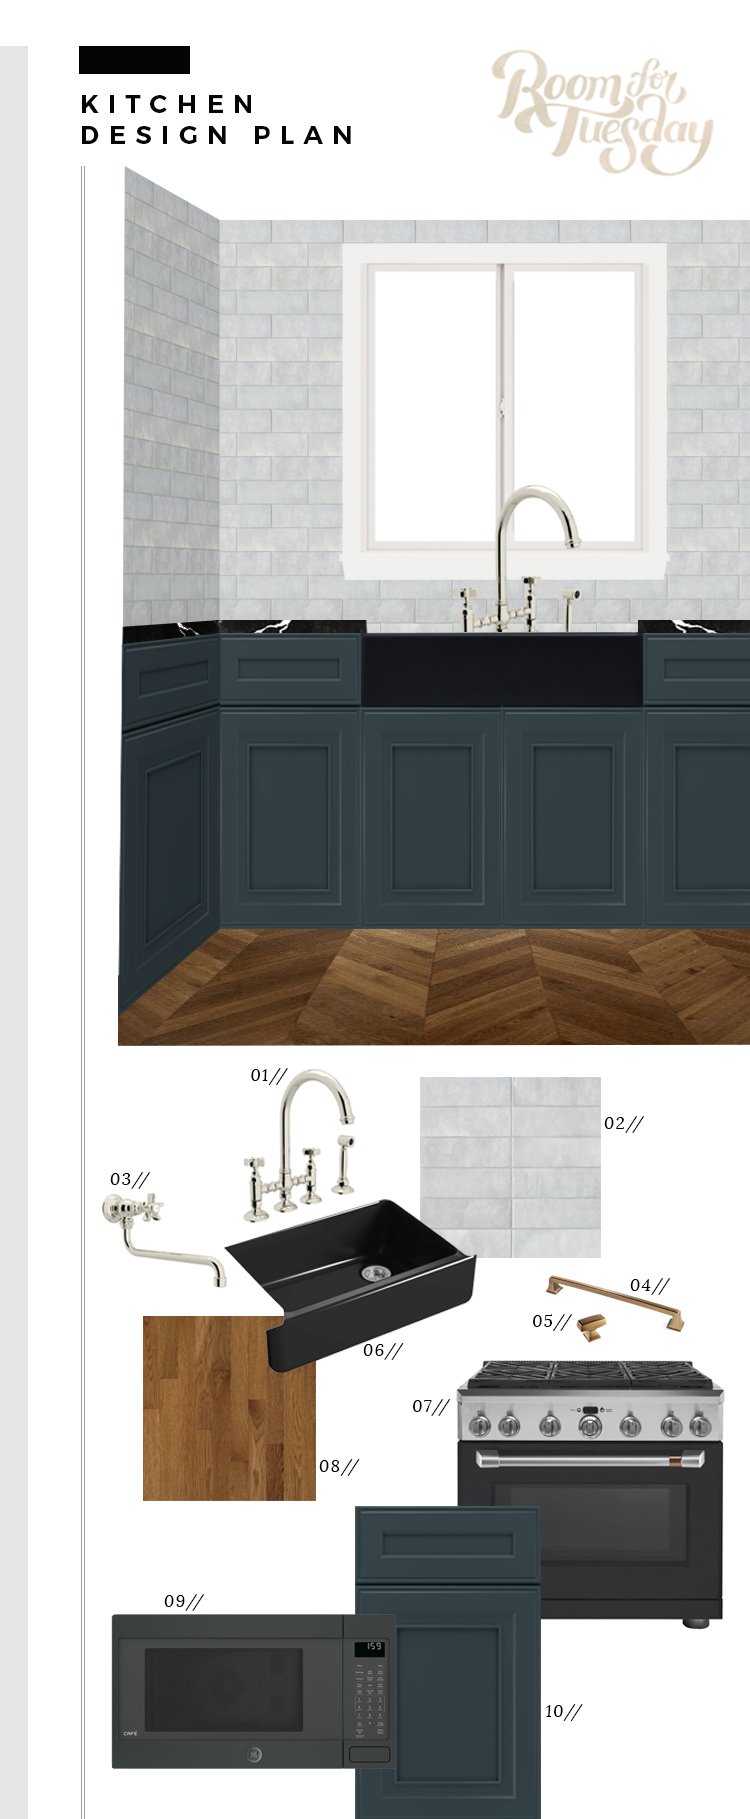 Our Next Big Project : The Kitchen - roomfortuesday.com